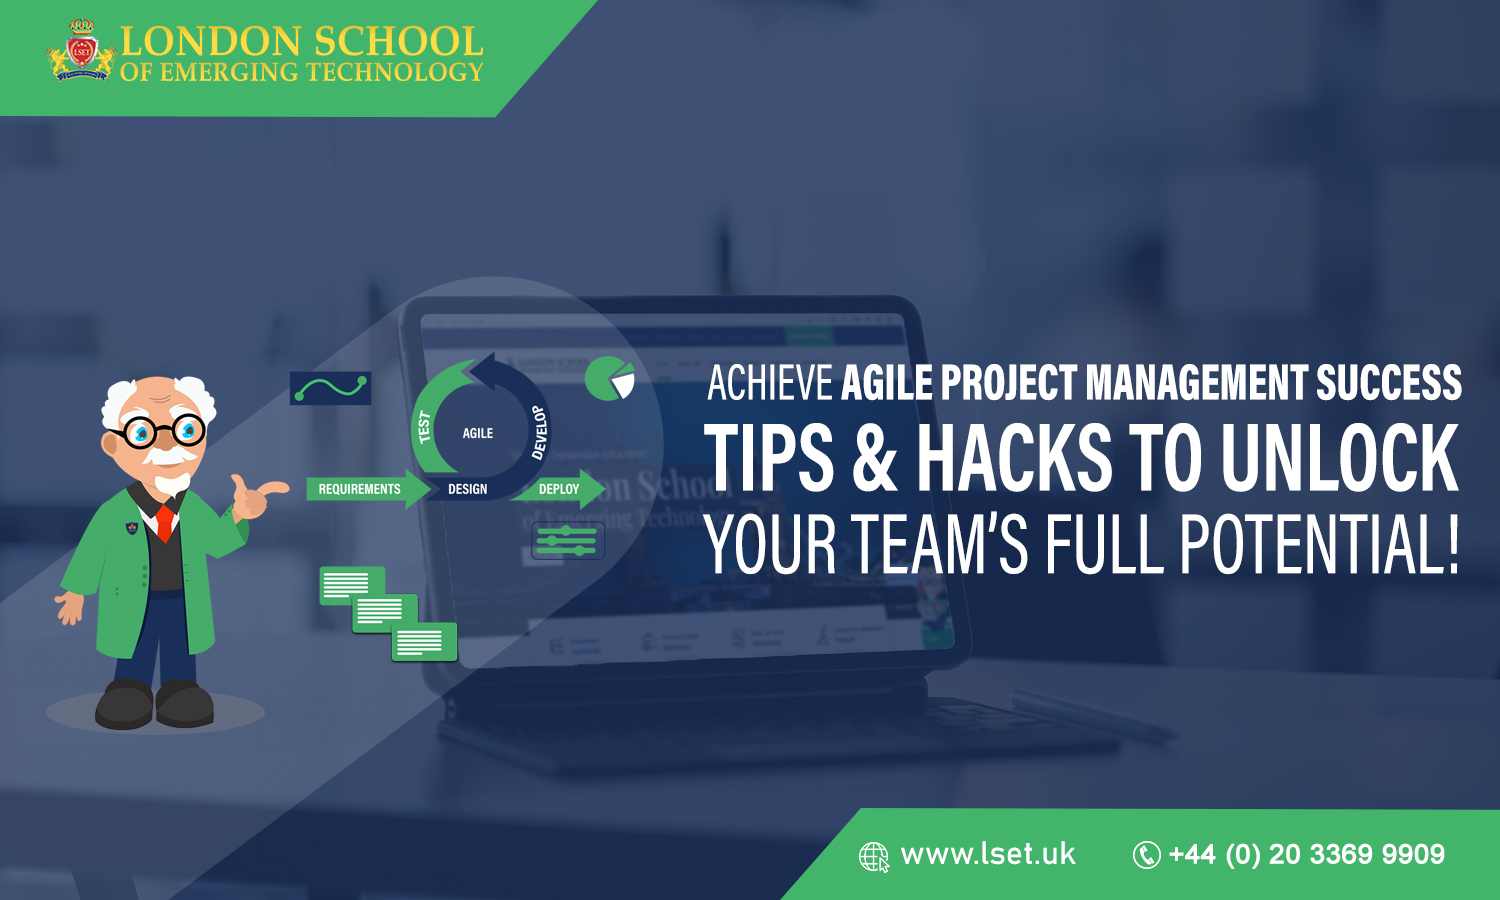 Achieve Agile Project Management Success Tips & Hacks To Unlock Your Team’s Full Potential!